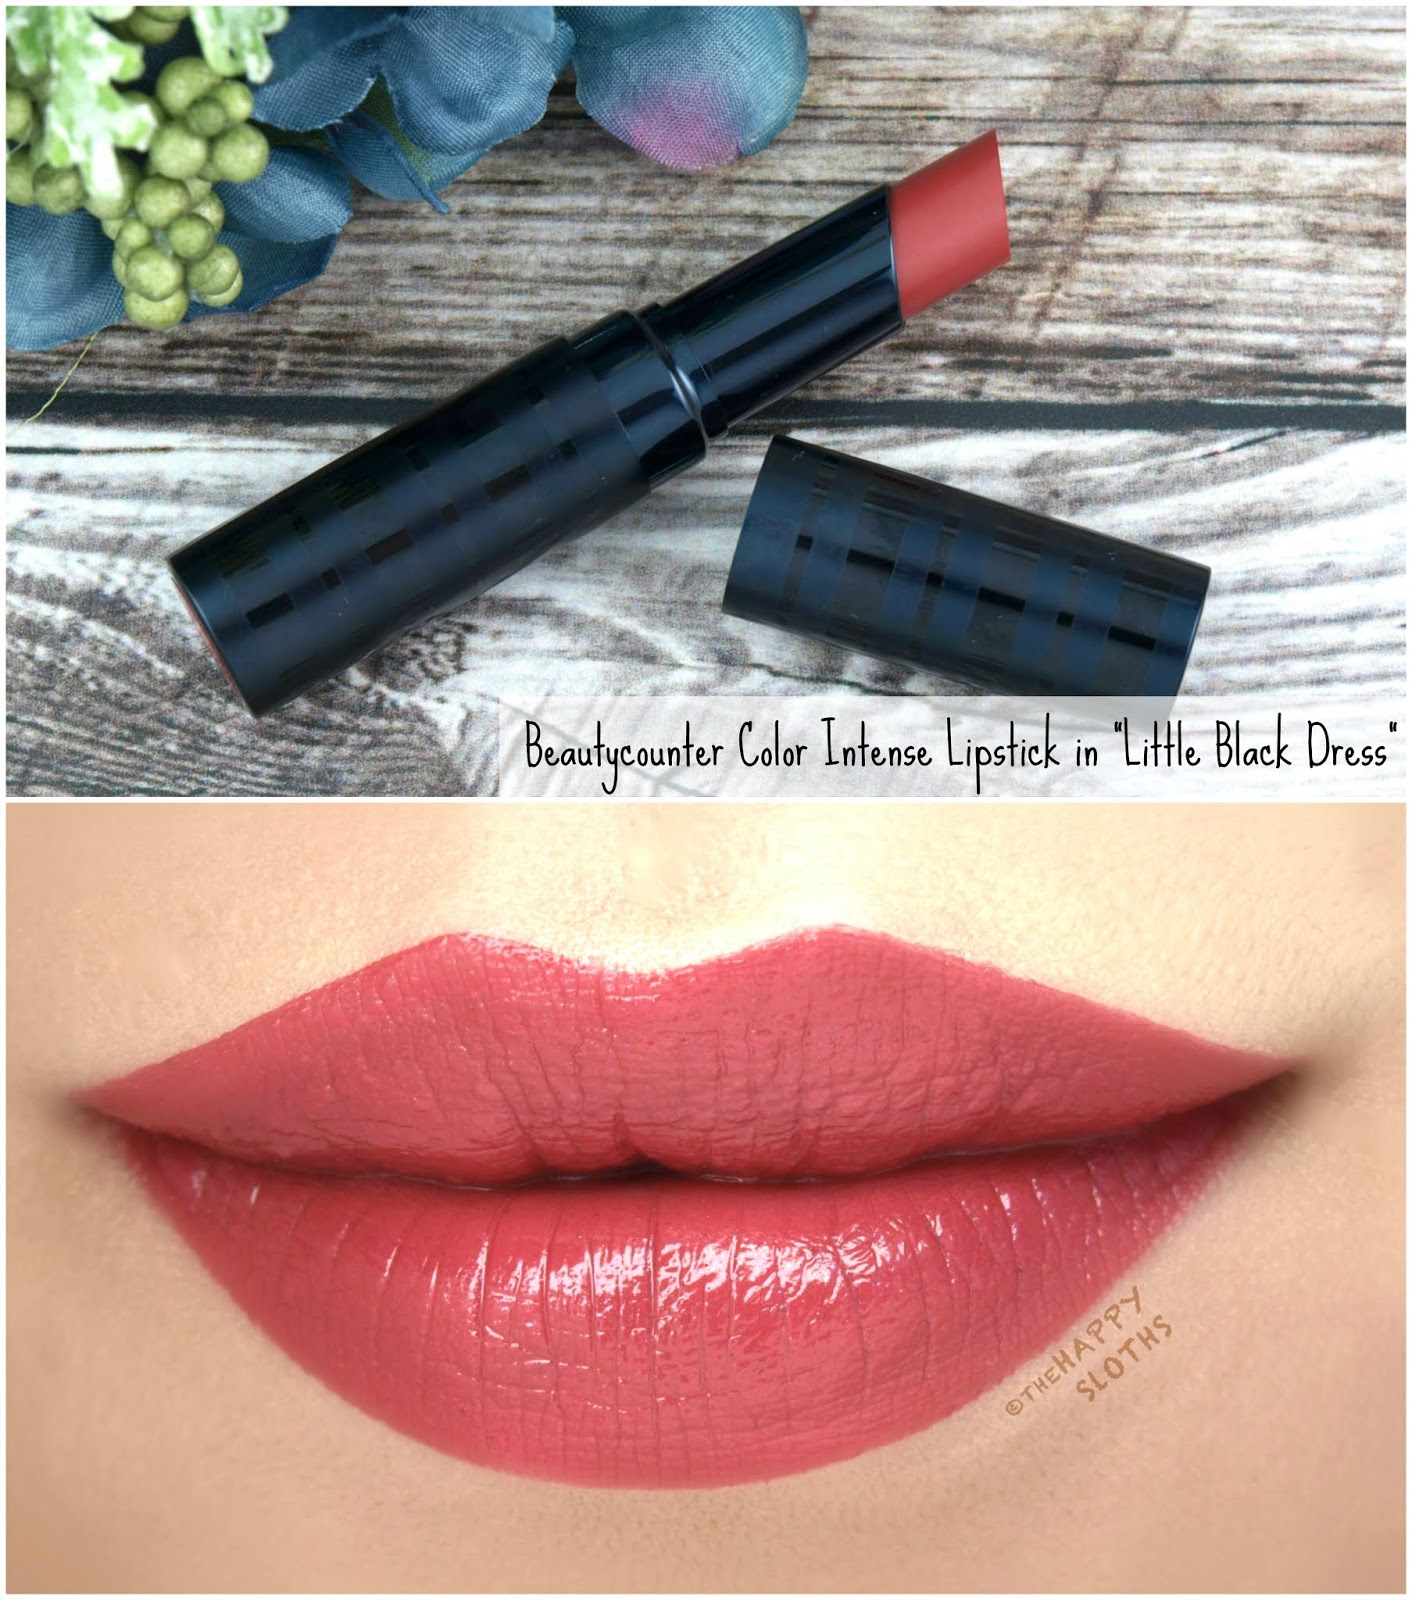 Beautycounter | Color Intense Lipstick in "Girls' Night": Review and Swatches